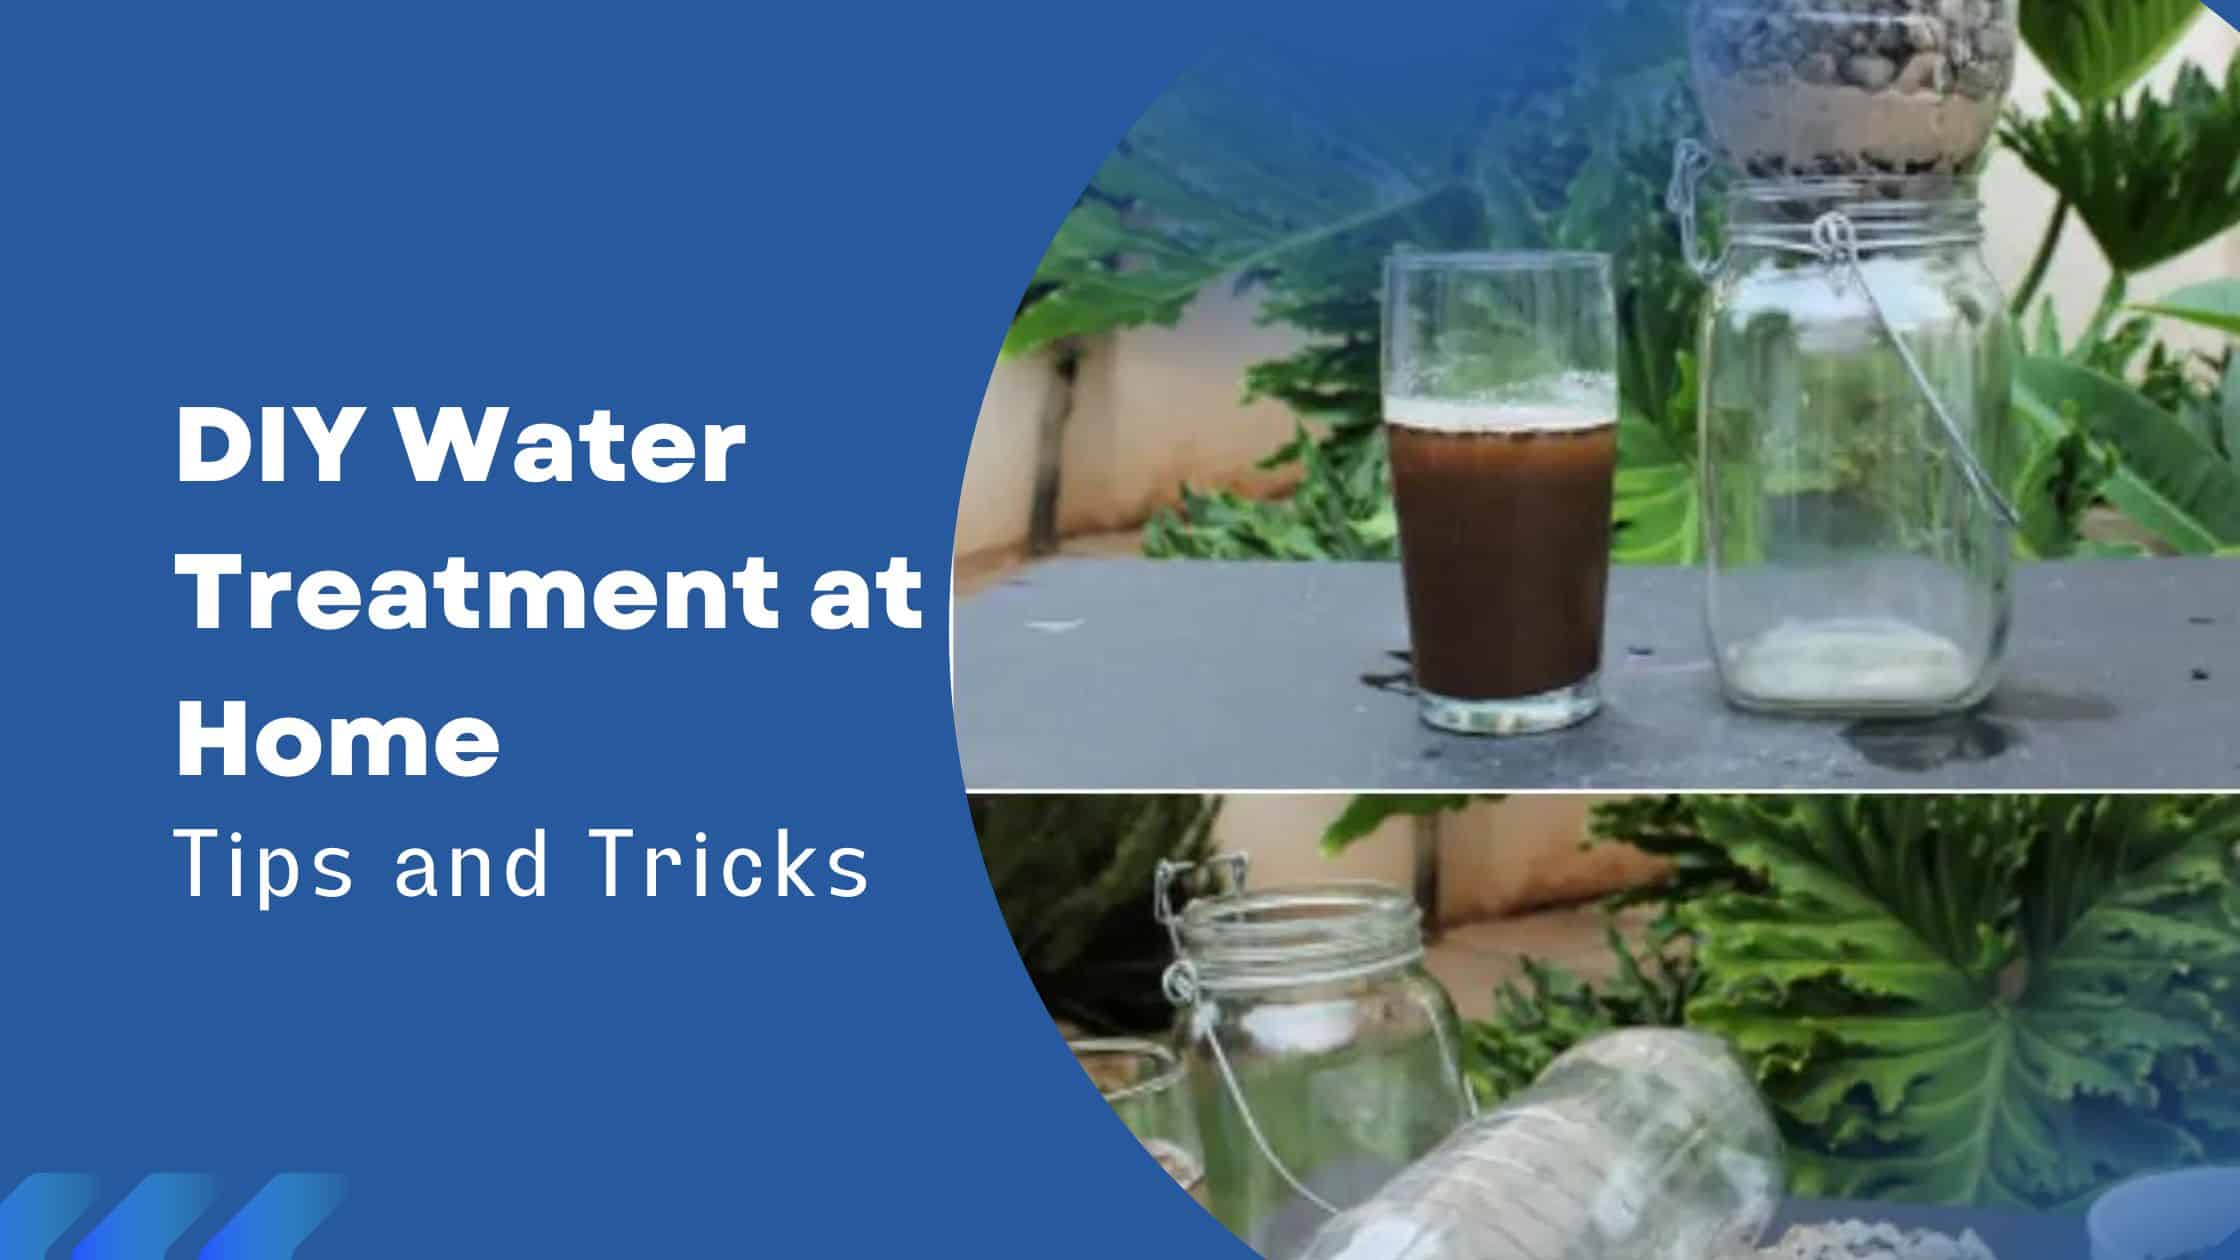 DIY Water Treatment at Home Tips and Tricks